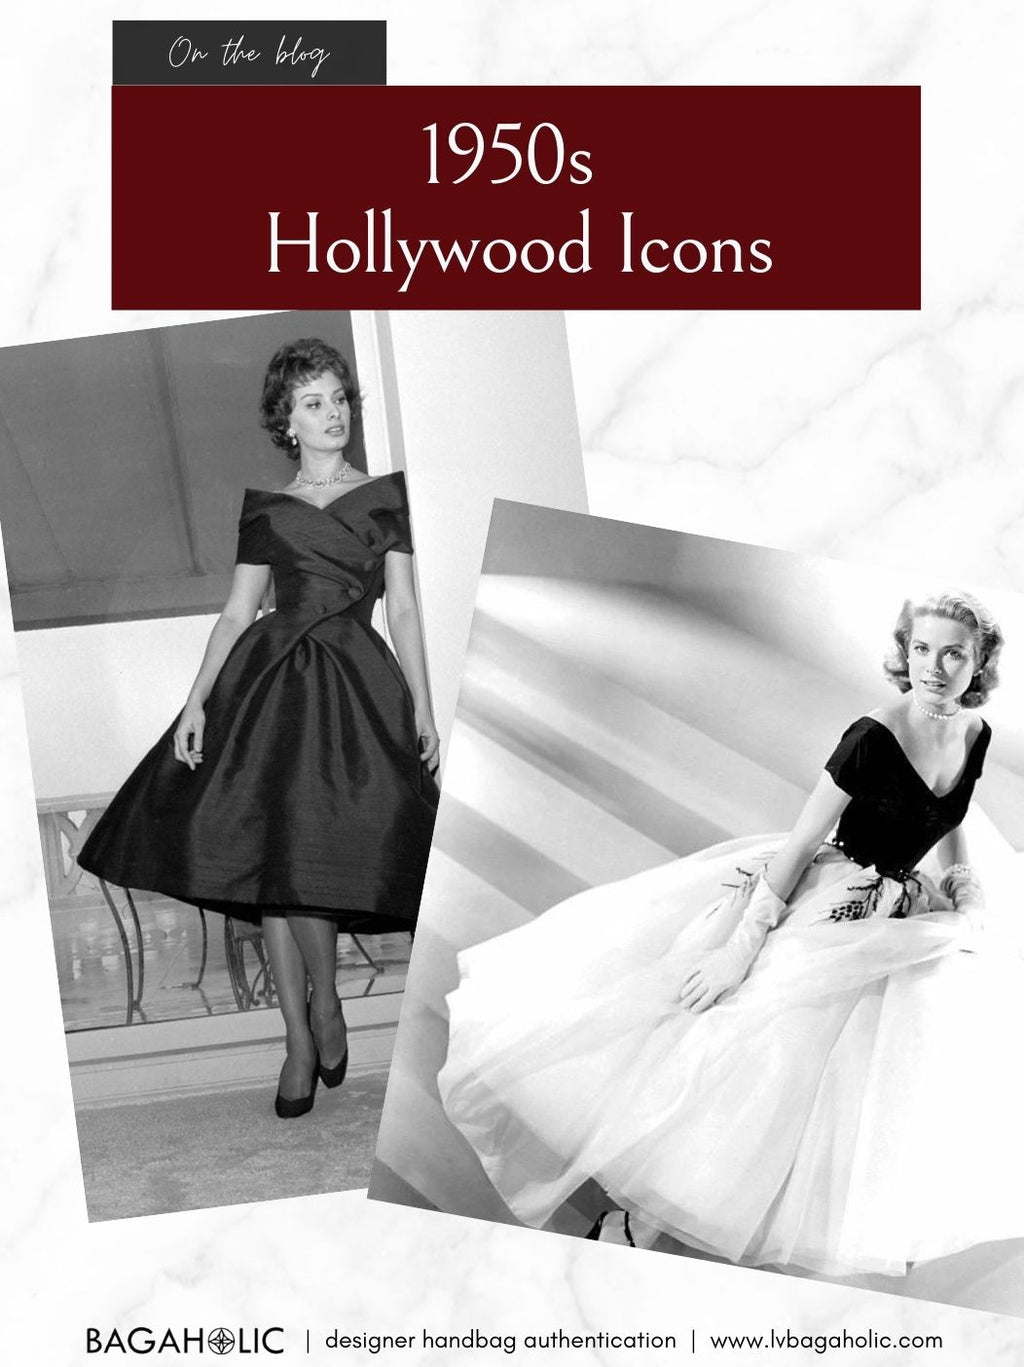 Explore 1950s Women's Dresses and Discover Fashion Trends of the Era.